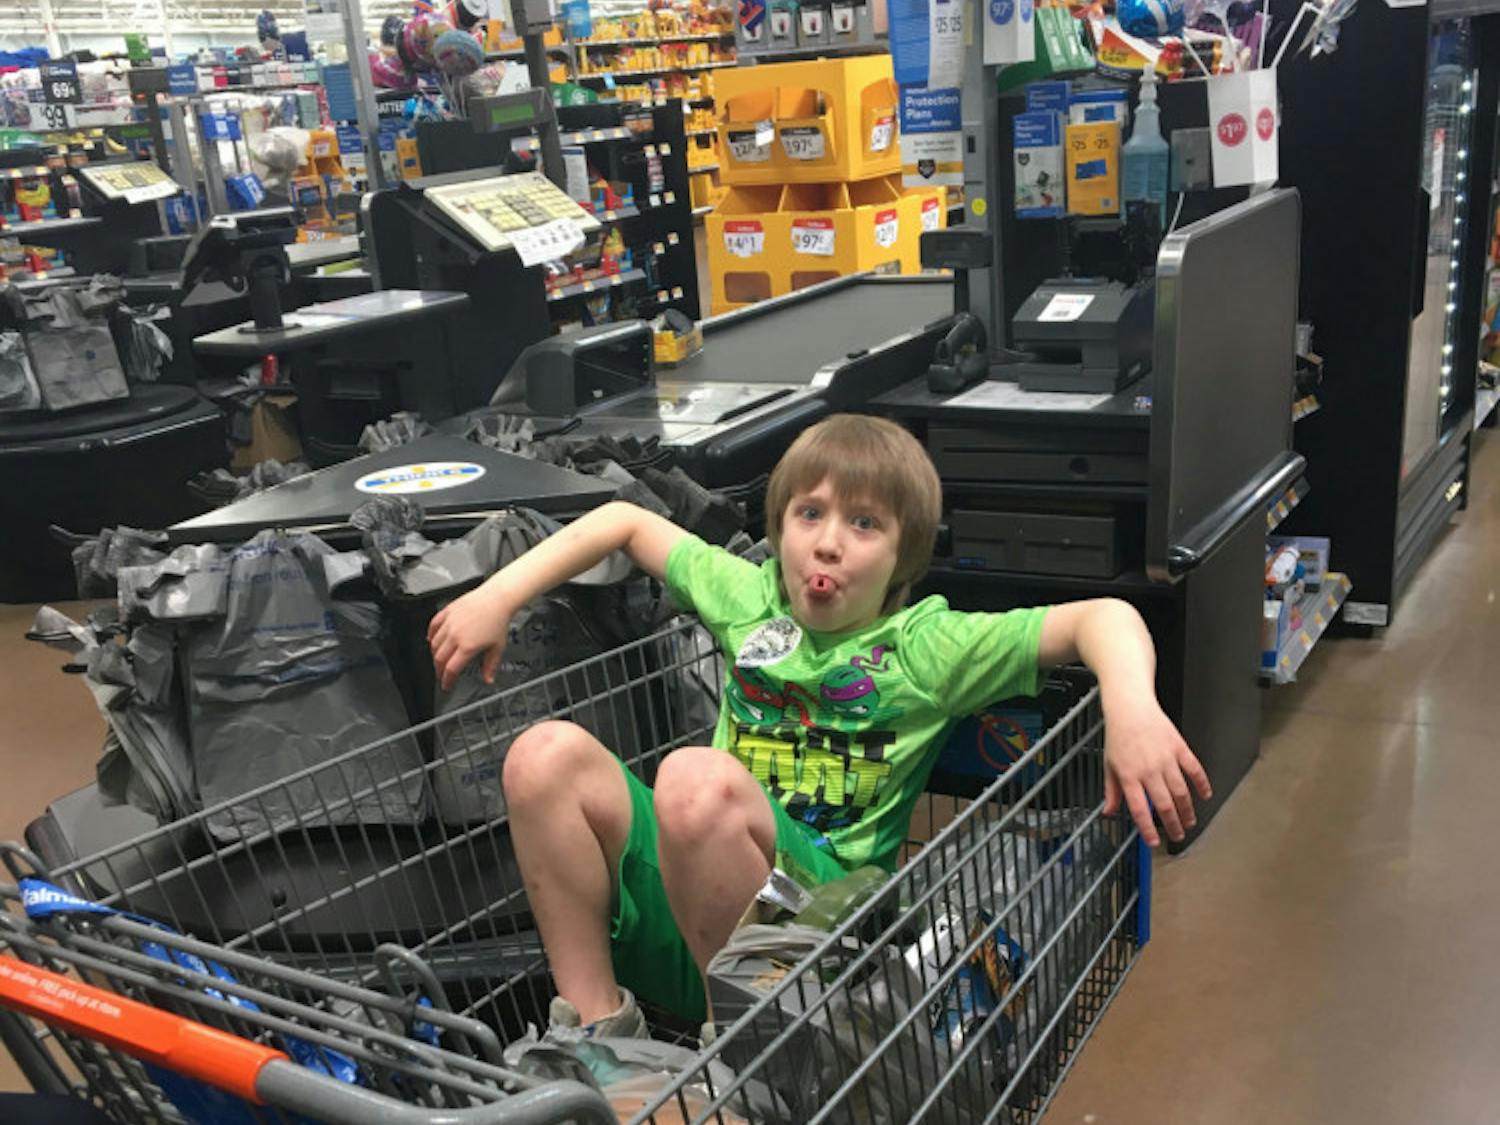 Logan Robbins sitting in his shopping cart of purchased items.
&nbsp;